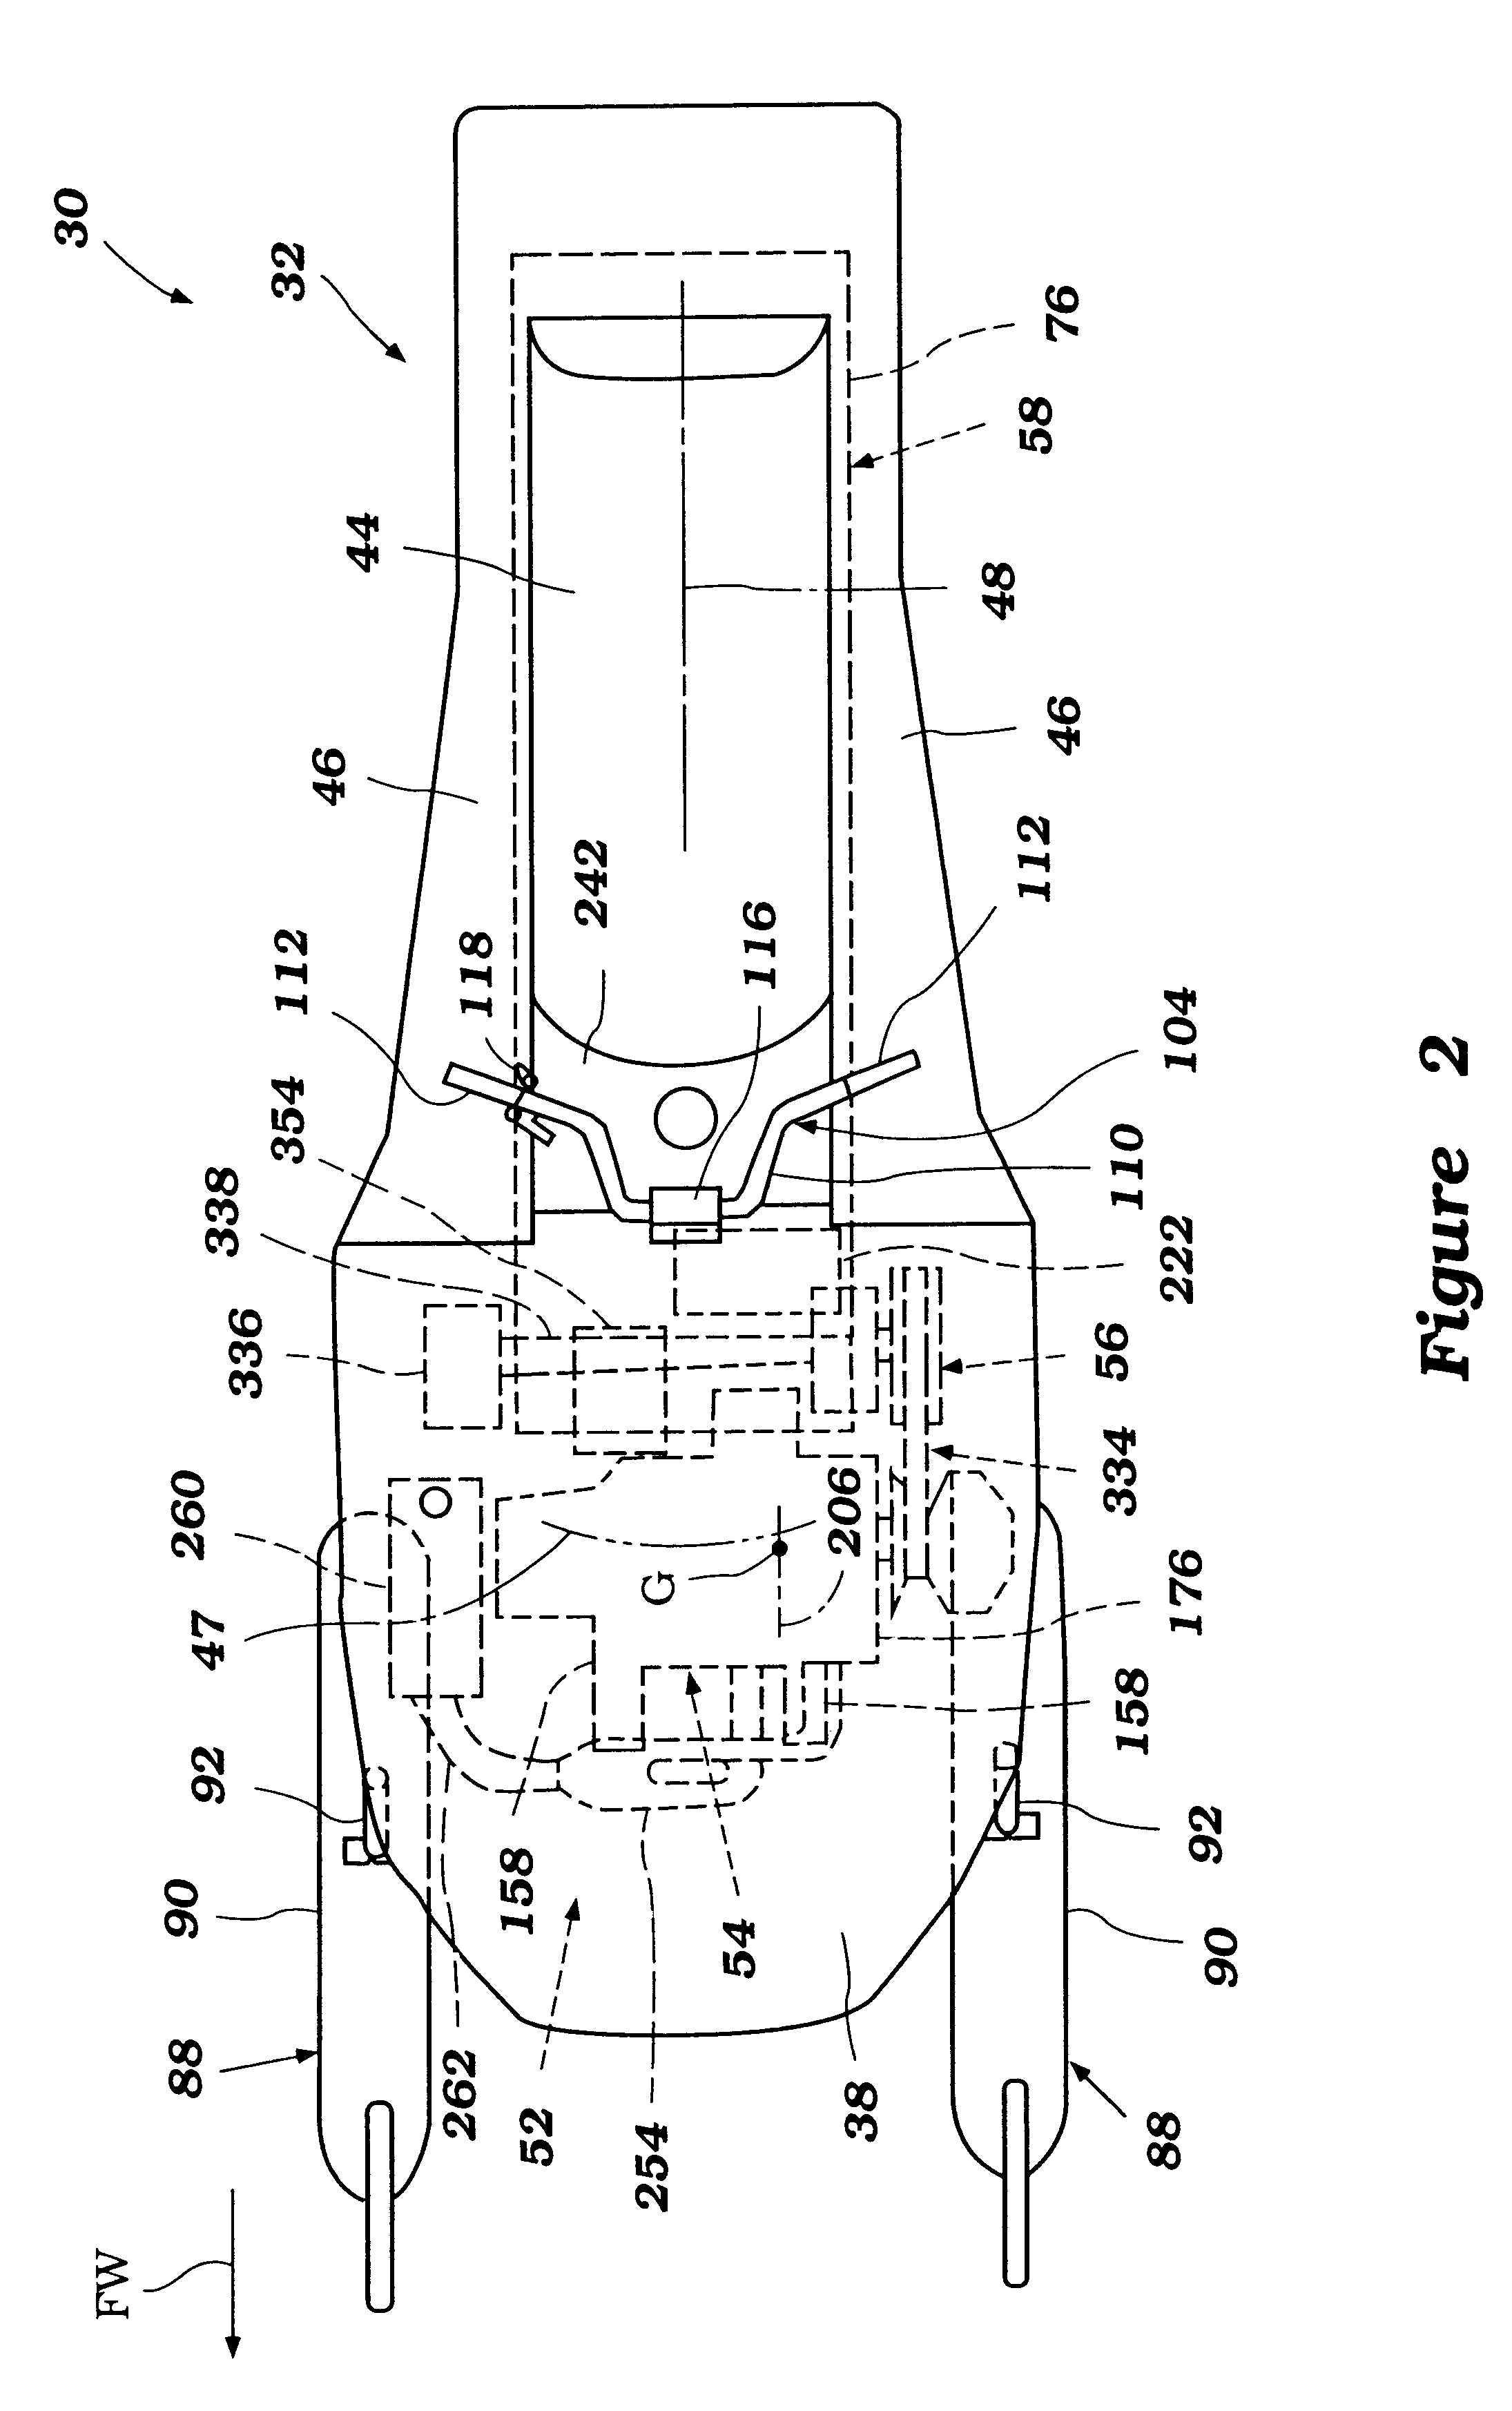 Steering and lubrication system component arrangement for land vehicles